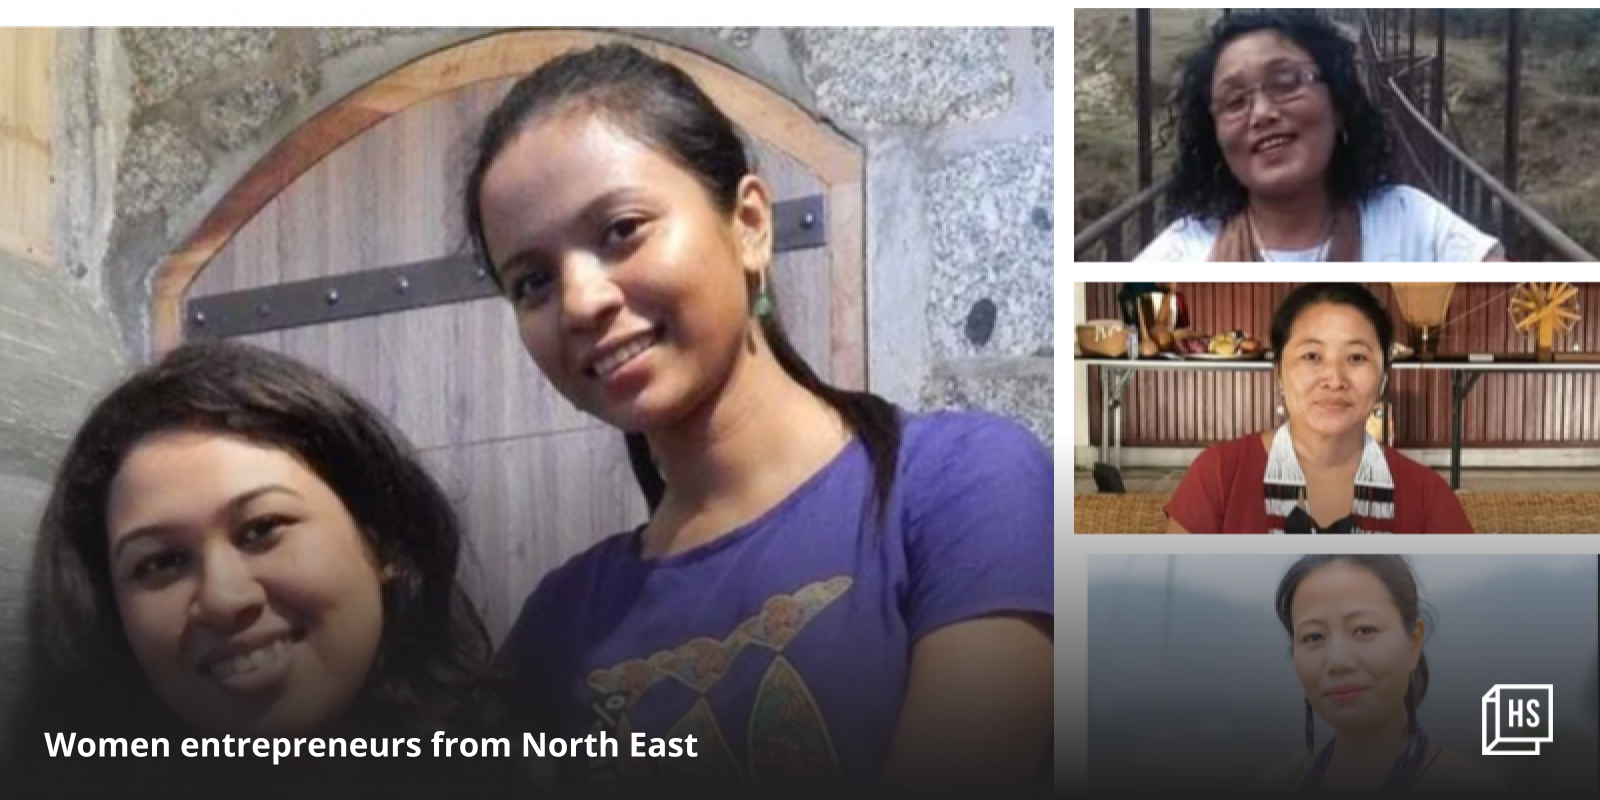 These women entrepreneurs from North East have made a mark with innovative ideas

